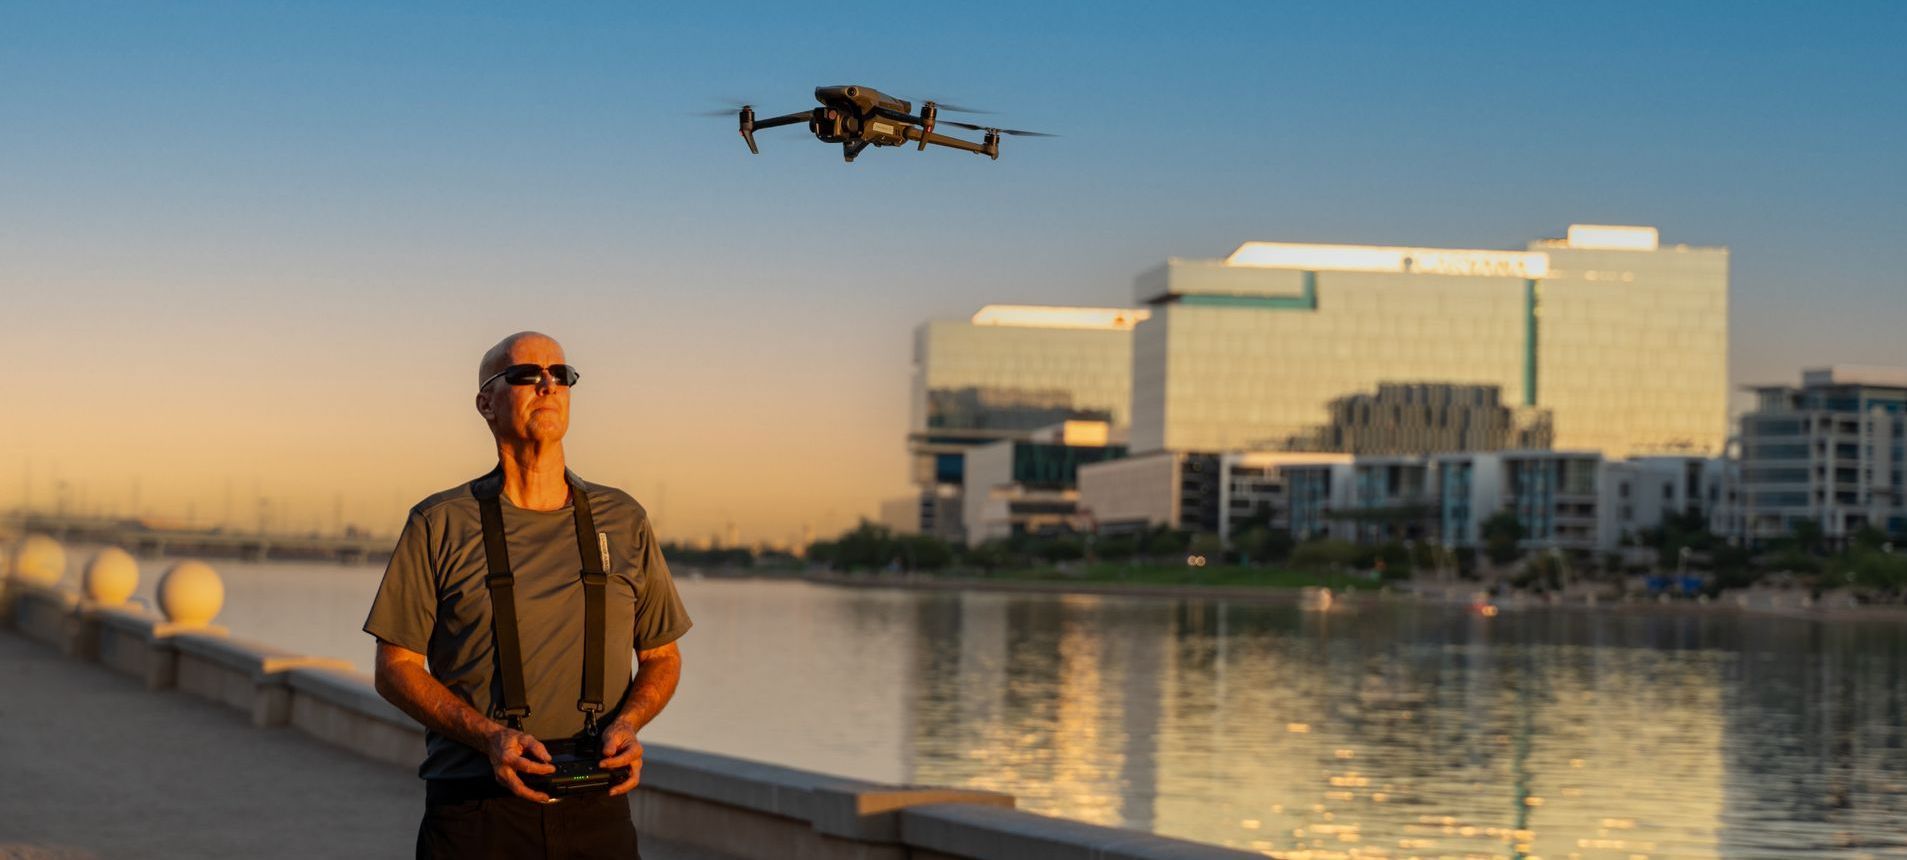 Photo by Phoenix Drone Pros, Robert Biggs, A man is standing next to a body of water while a drone flies overhead.